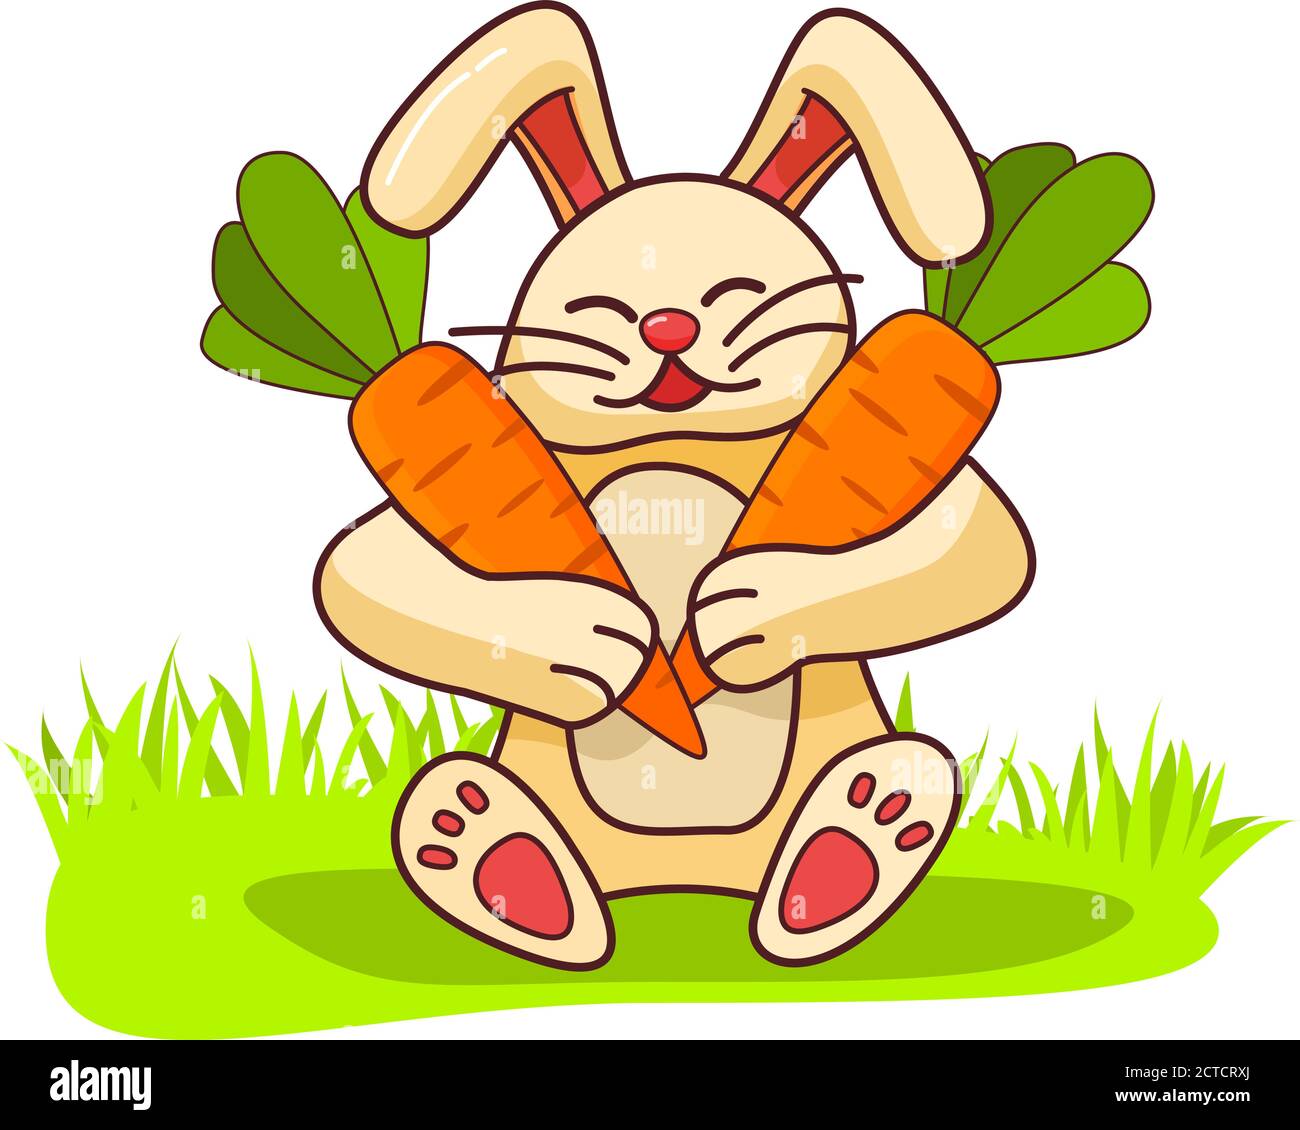 Happy rabbit is holding carrots. Animal hare with a harvest of vegetables on the grass. Stock Vector